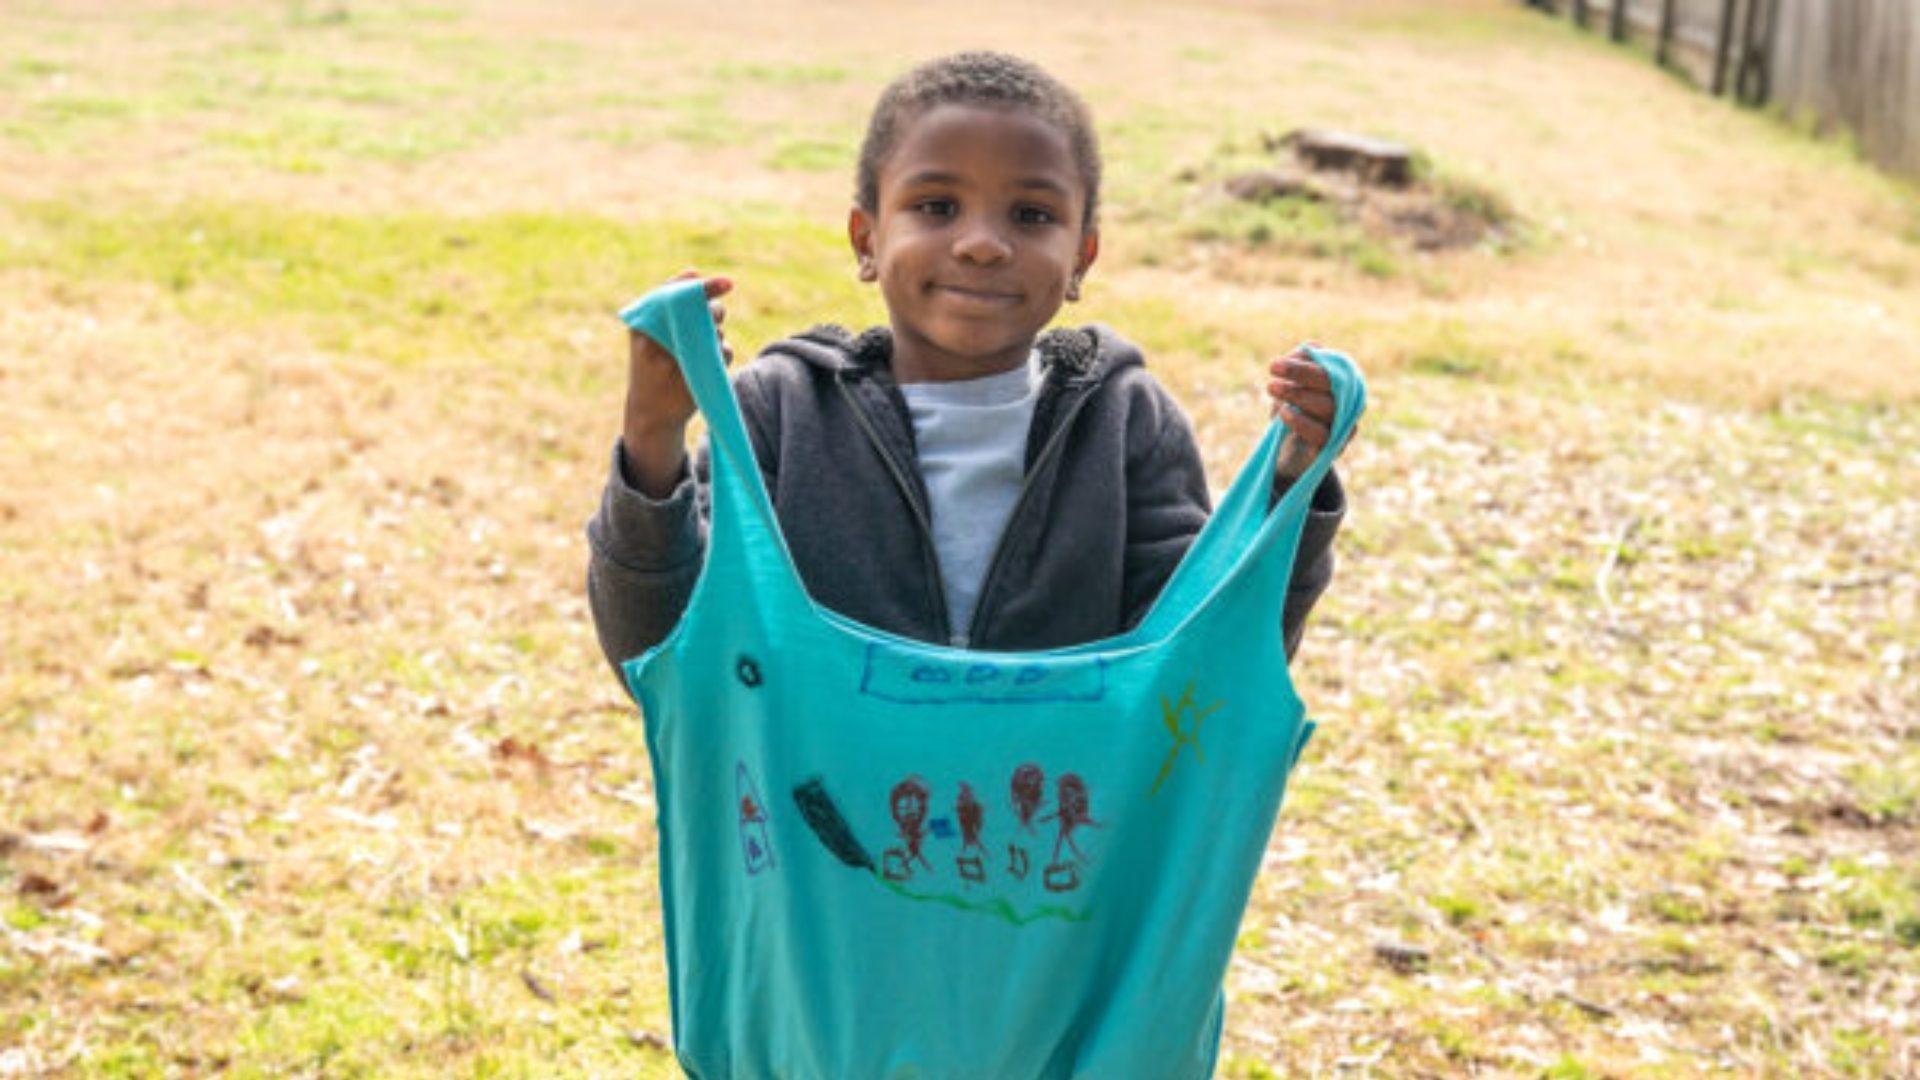 A black boy holding a blue bag made out of a recycled tee shirt.